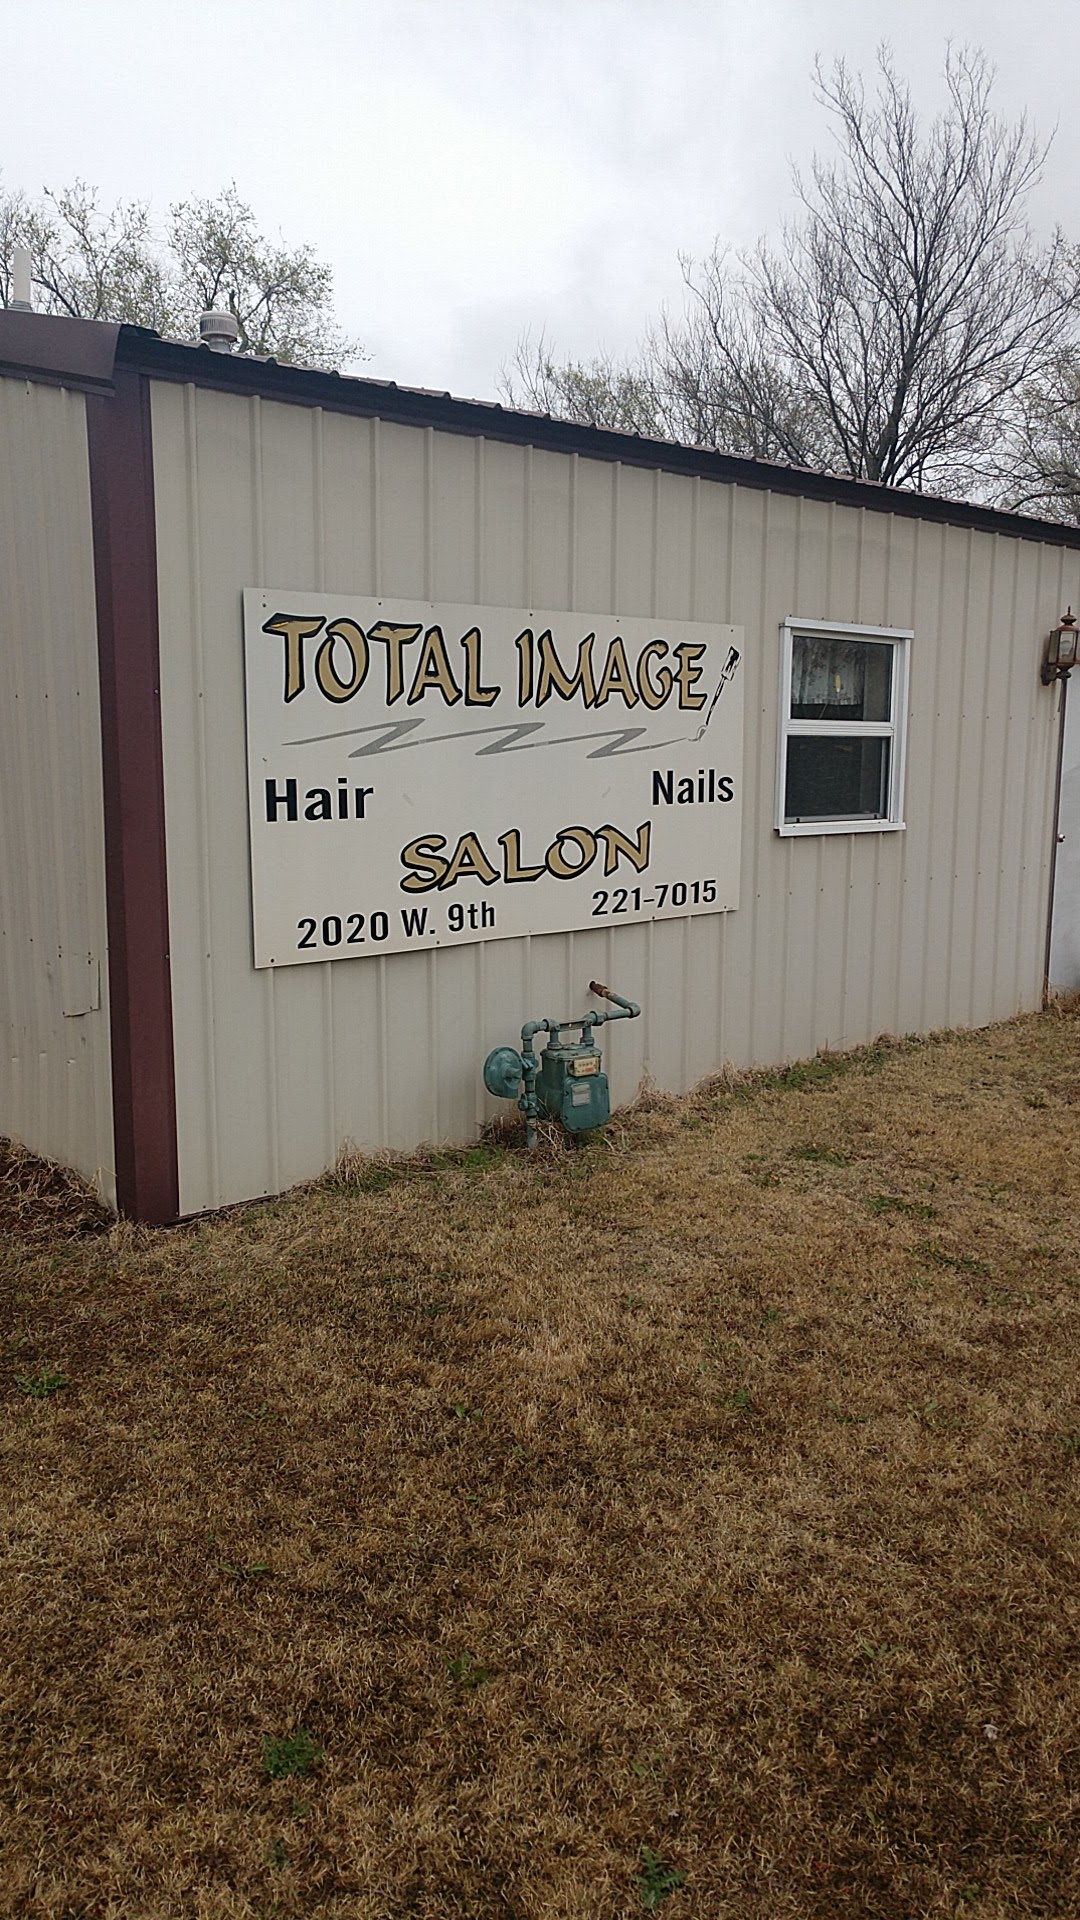 Total Image 2020 W 9th Ave, Winfield Kansas 67156